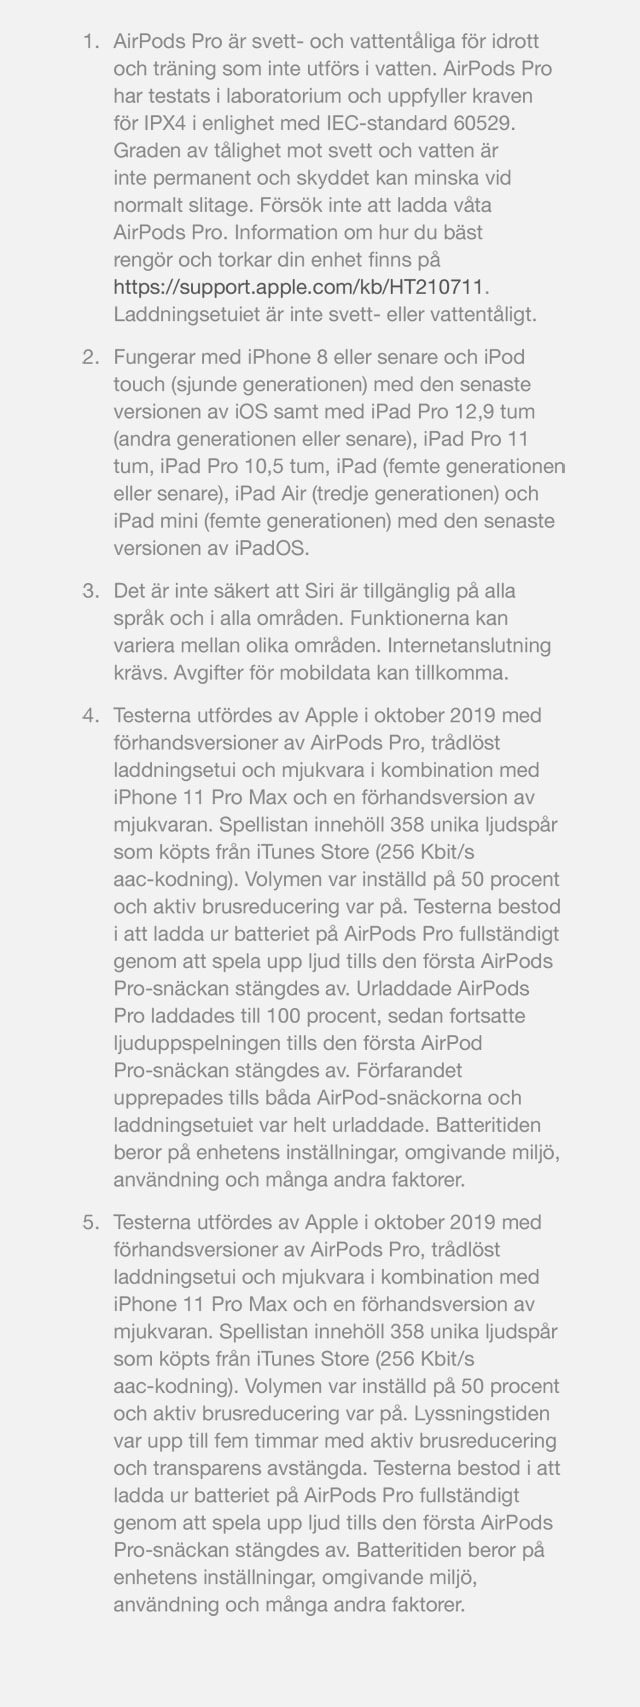 AirPods Pro disclaimer